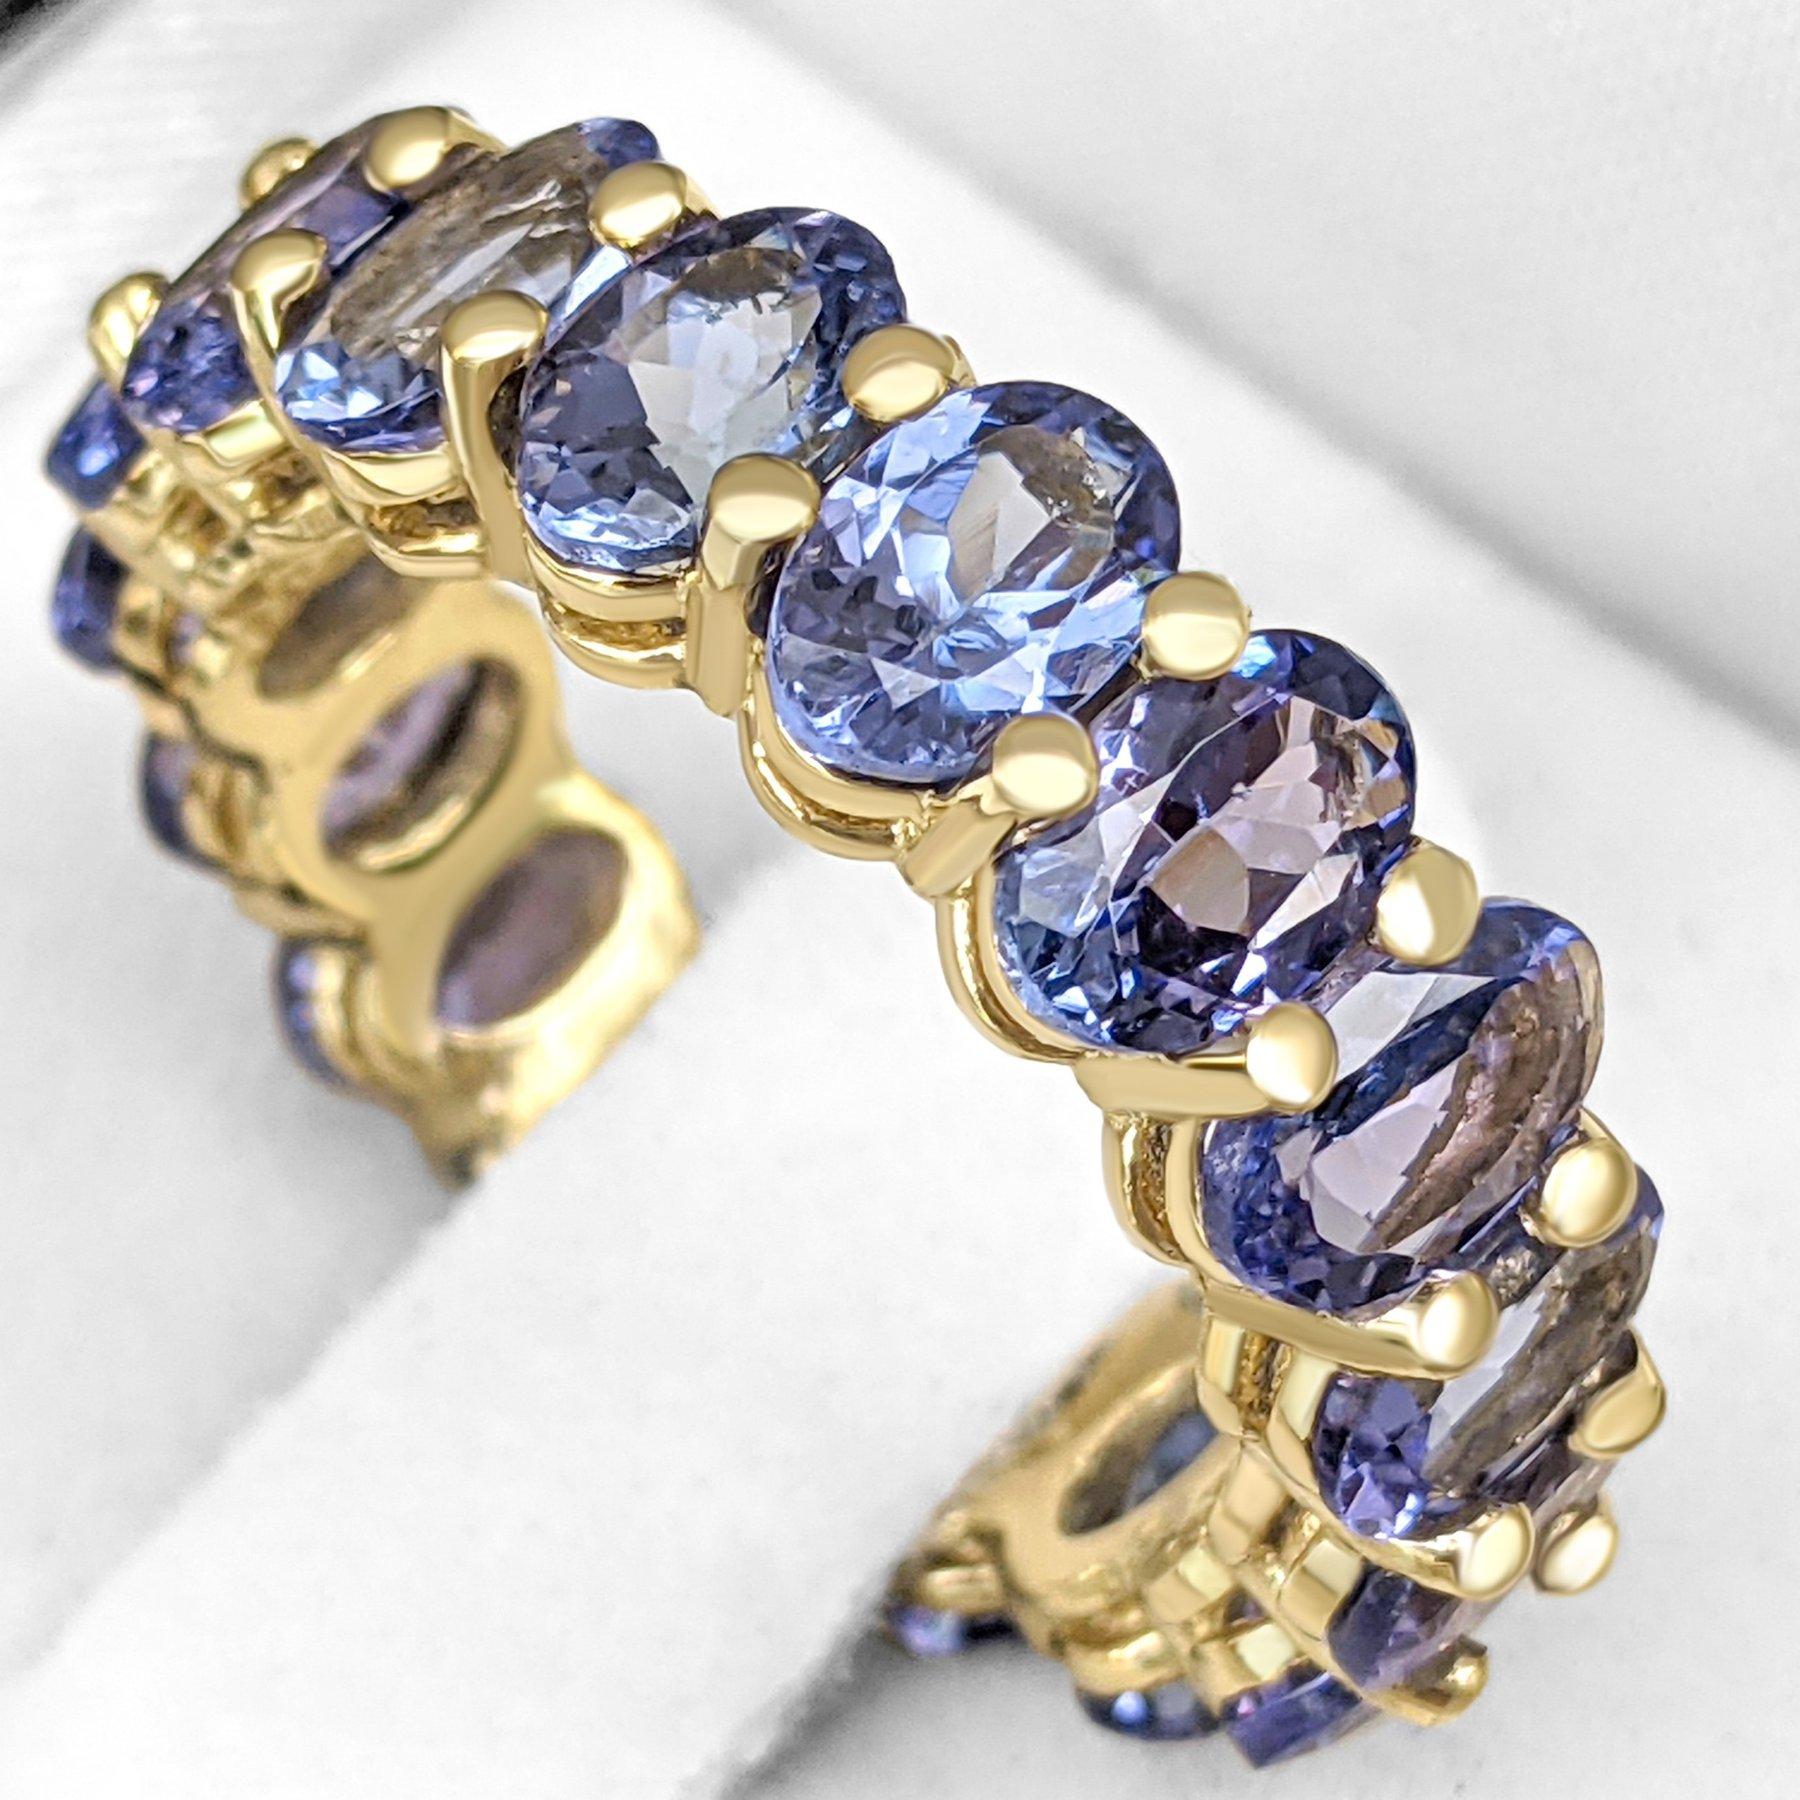 Women's NO RESERVE! 7.31 Carat Tanzanite Eternity Band - 14 kt. Yellow Gold - Ring For Sale